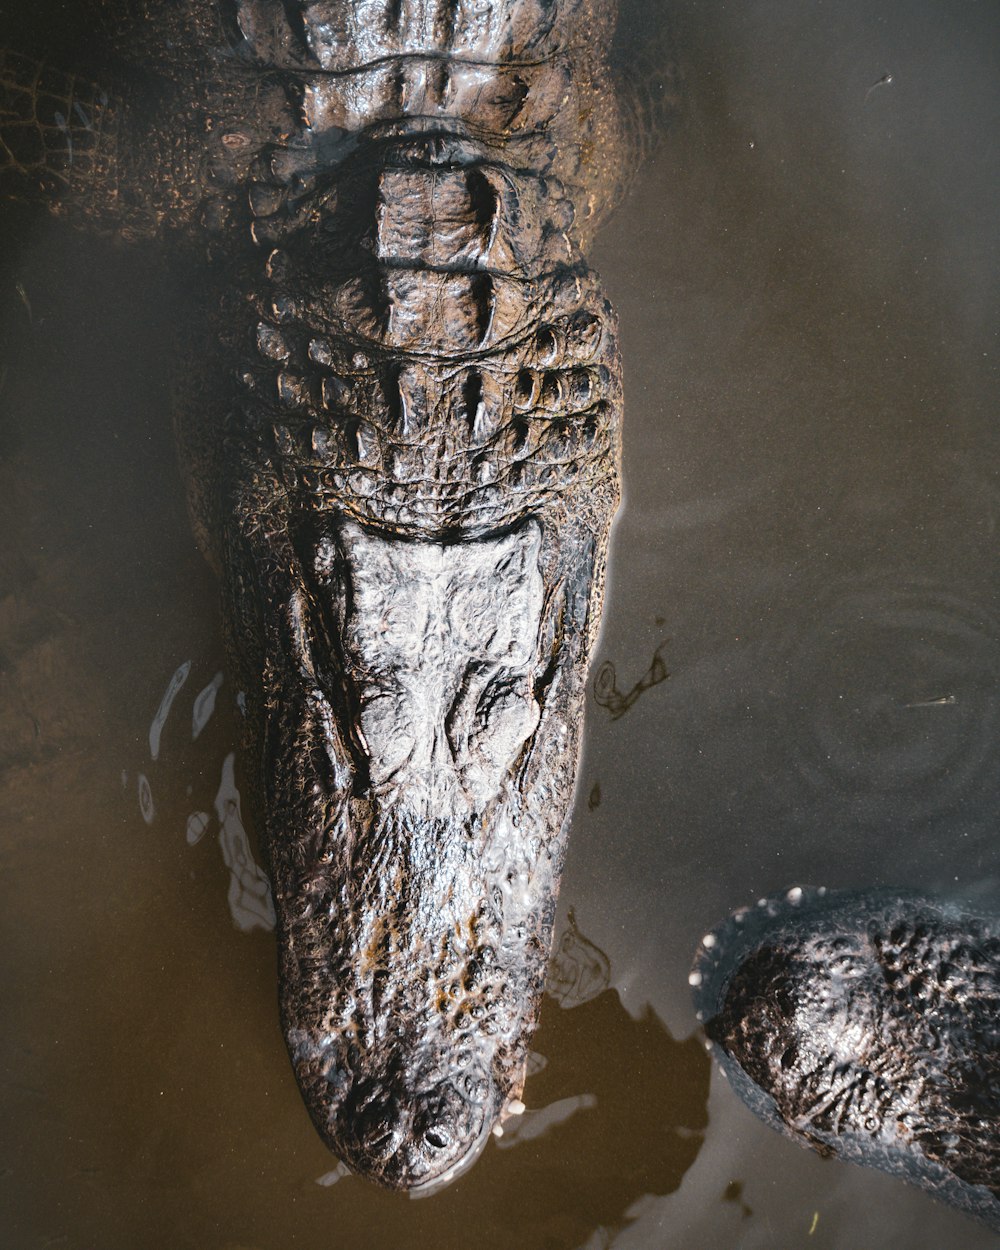 a large alligator is submerged in the water